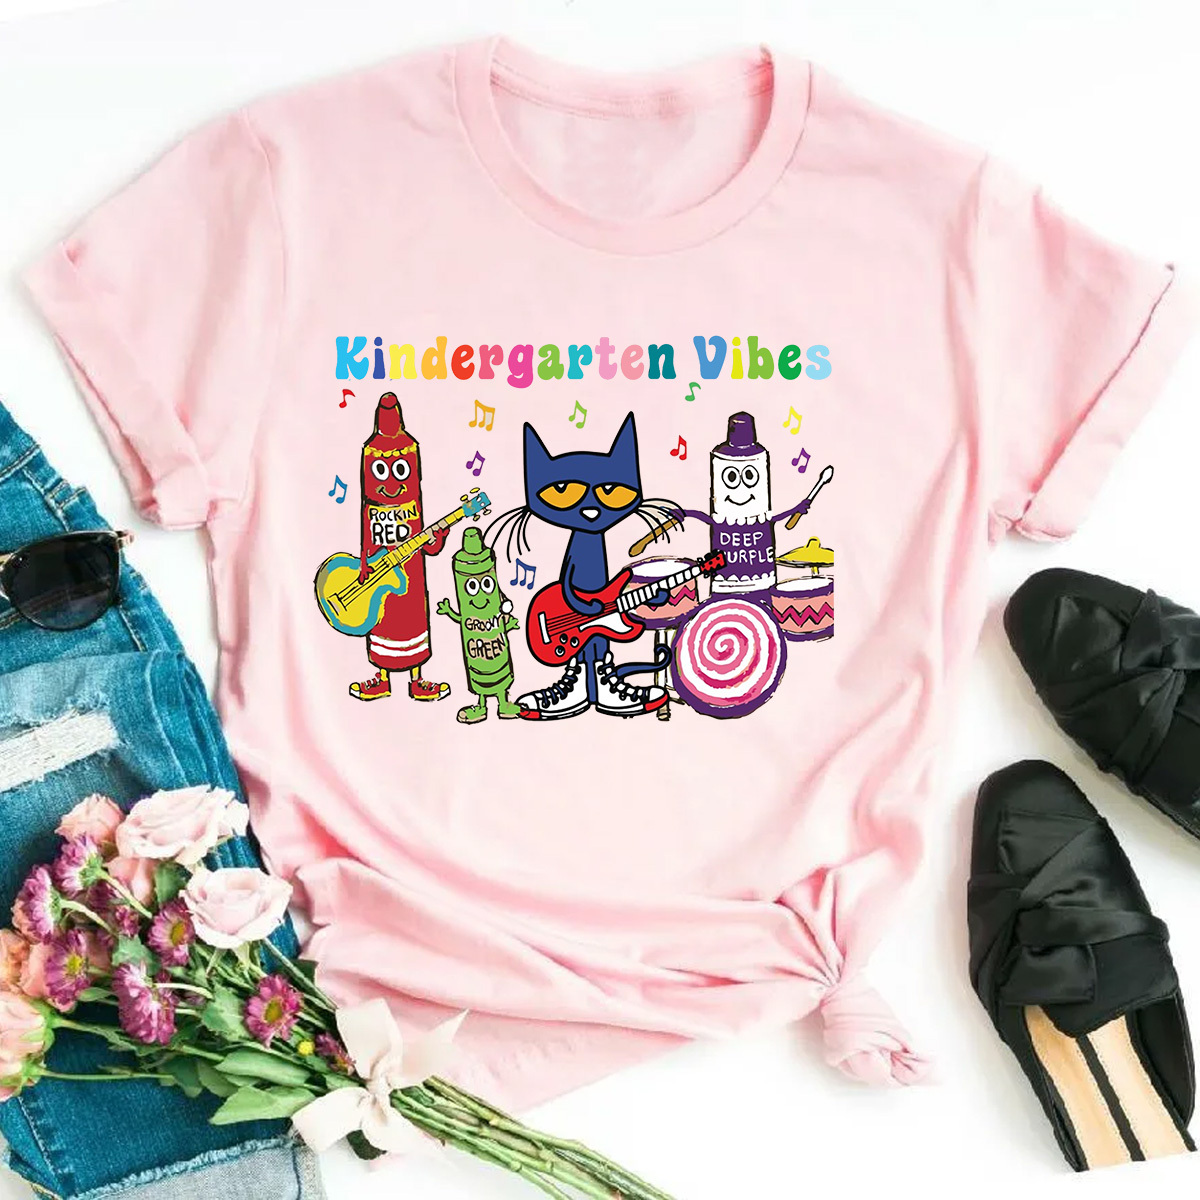 Back to School Pete the cat shirt, Personalized Kindergarten Vibes Back to School Kids Shirt, Monogram Pencil Shirt, pete the cat shirt